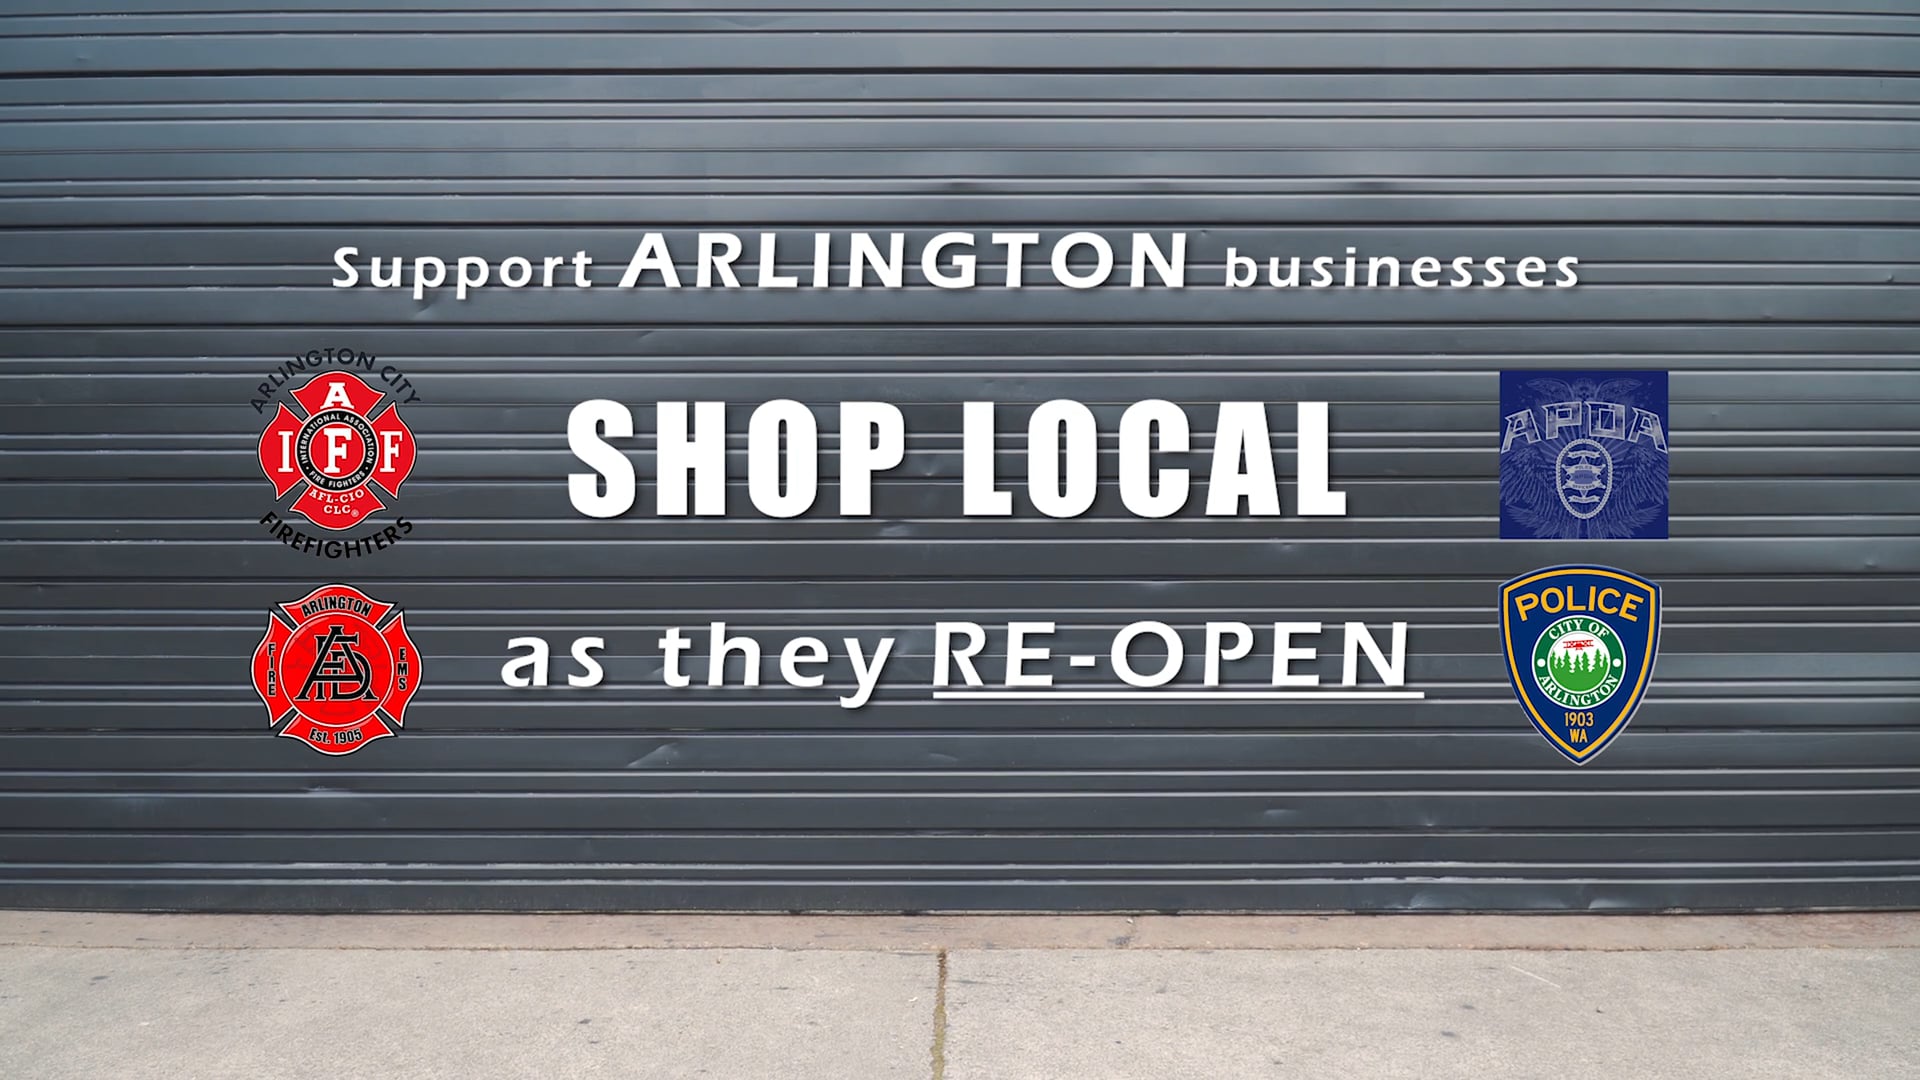 Shop Local with Arlington Fire and Police